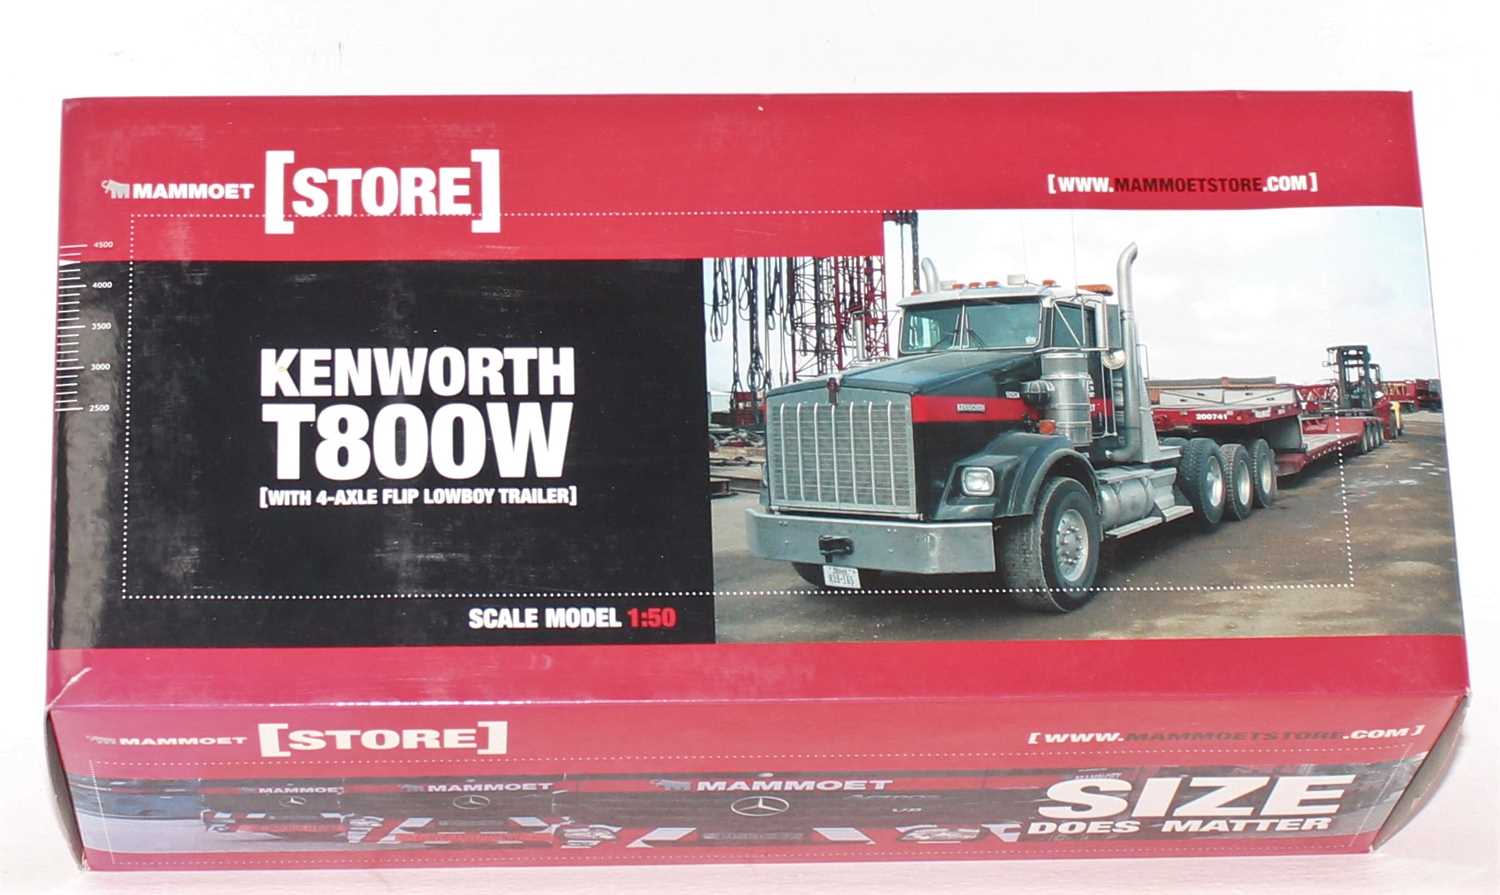 A Sword Precision Models model No. 410010 1/50 scale boxed diecast model of a Mammoet Kenworth - Image 2 of 2